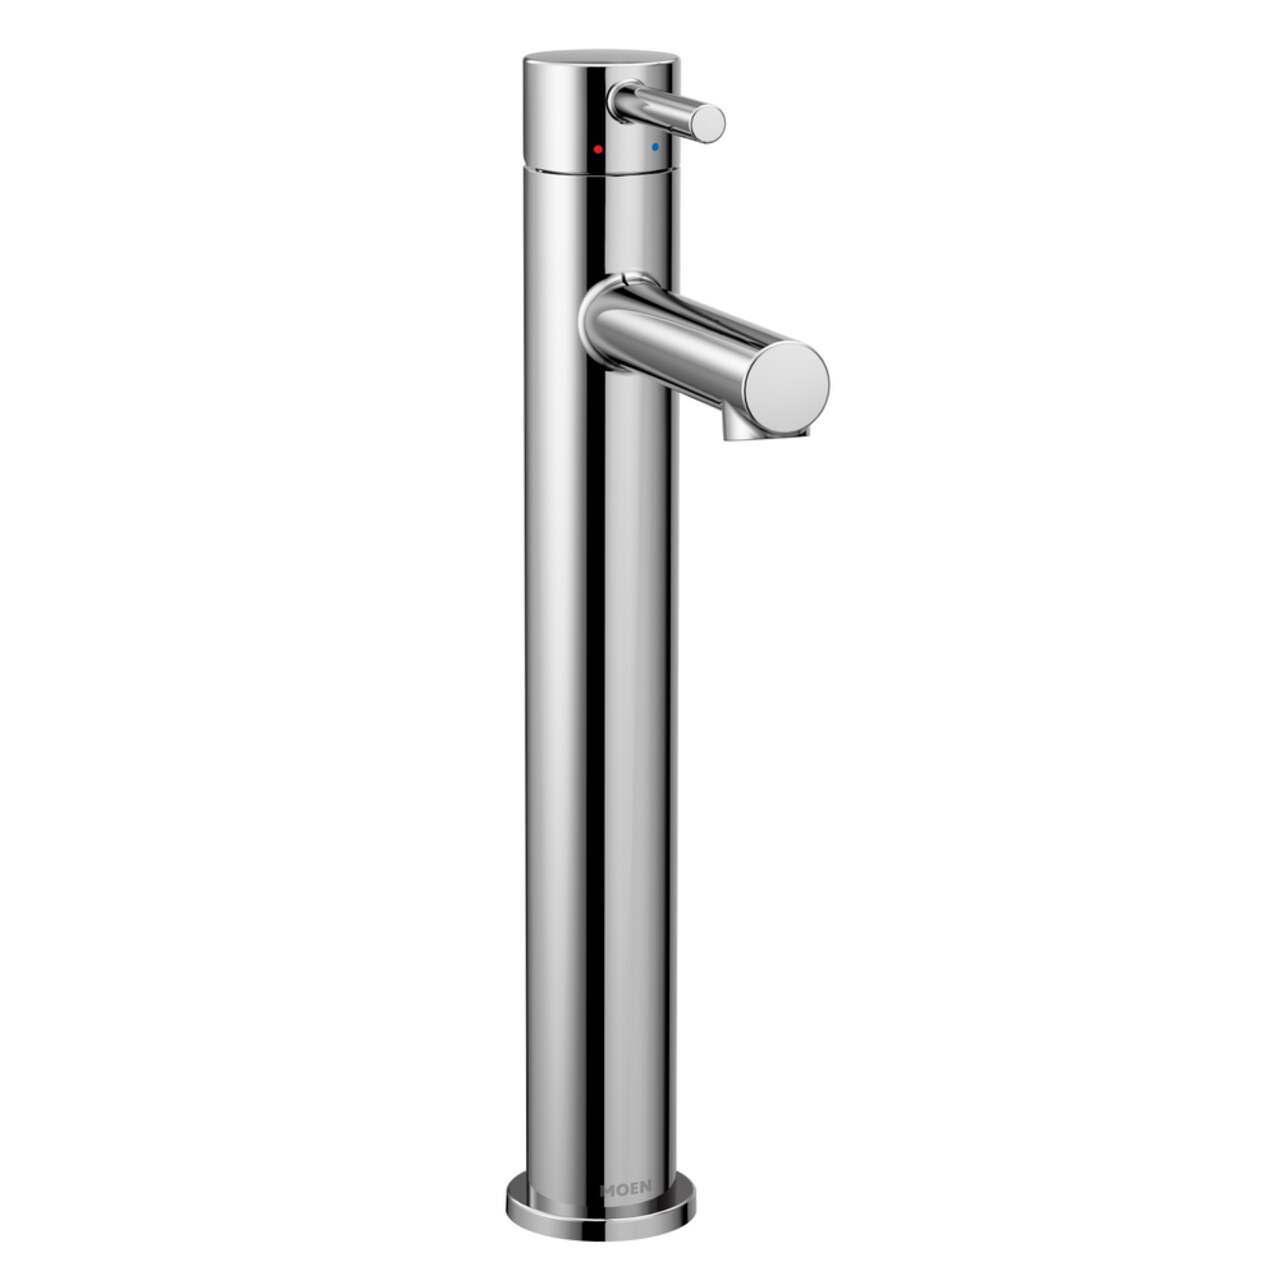 Align 9-Inch Hand Towel Bar in Chrome